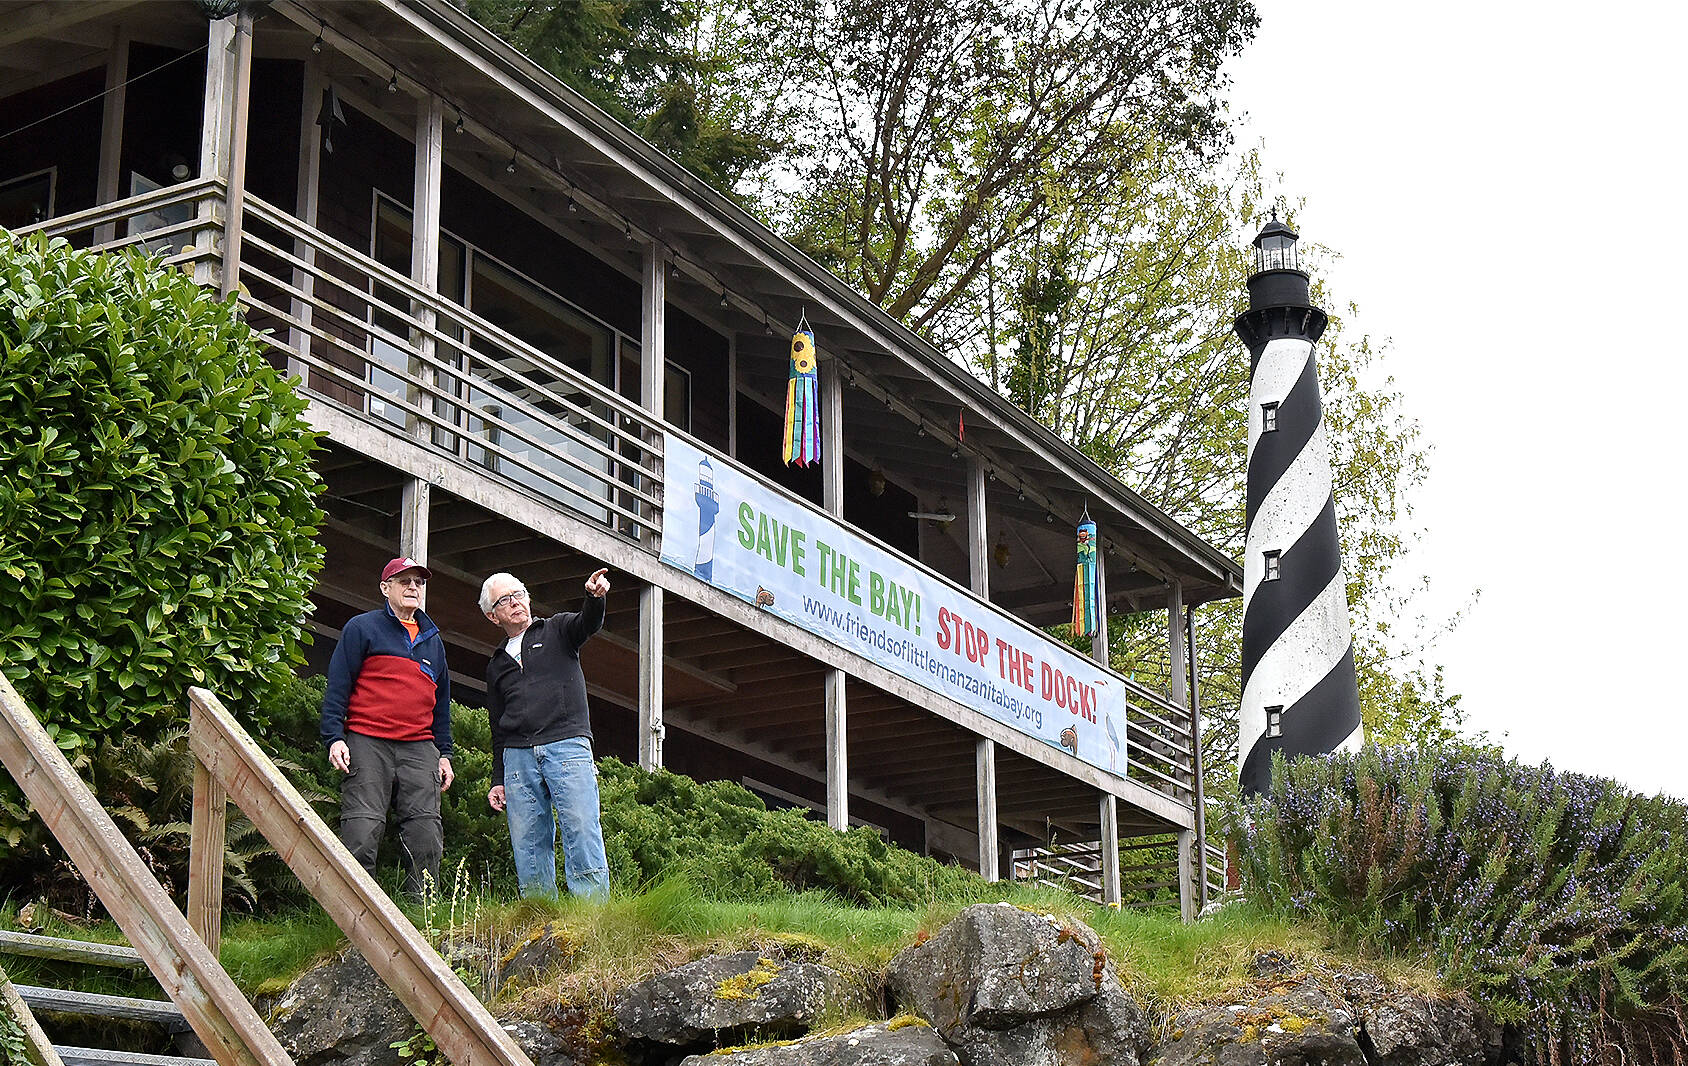 Dr. Fred Grimm and Jim Coon, president of the board of Friends of Little Manzanita Bay, stand beneath a sign they put up to protest a proposal submitted by two neighbors who want to replace an 84-foot wooden dock with a 240-foot steel pier, ramp and dock including two boat lifts. Grimm, who has lived on the point with his wife, Willie since the 1970s, decided to display their protest by hanging the 25-foot-long banner in front of their house with the words, “SAVE THE BAY! STOP THE DOCK!”  Little Manzanita Bay is designated Critical Habitat, under the Endangered Species Act, for Puget Sound Chinook salmon, Puget Sound Rockfish, and Southern Resident Killer Whale. The Bay is also considered Essential Fish Habitat for Coho, Chinook, and Puget Sound pink salmon.Nancy Treder/Bainbridge Island Review